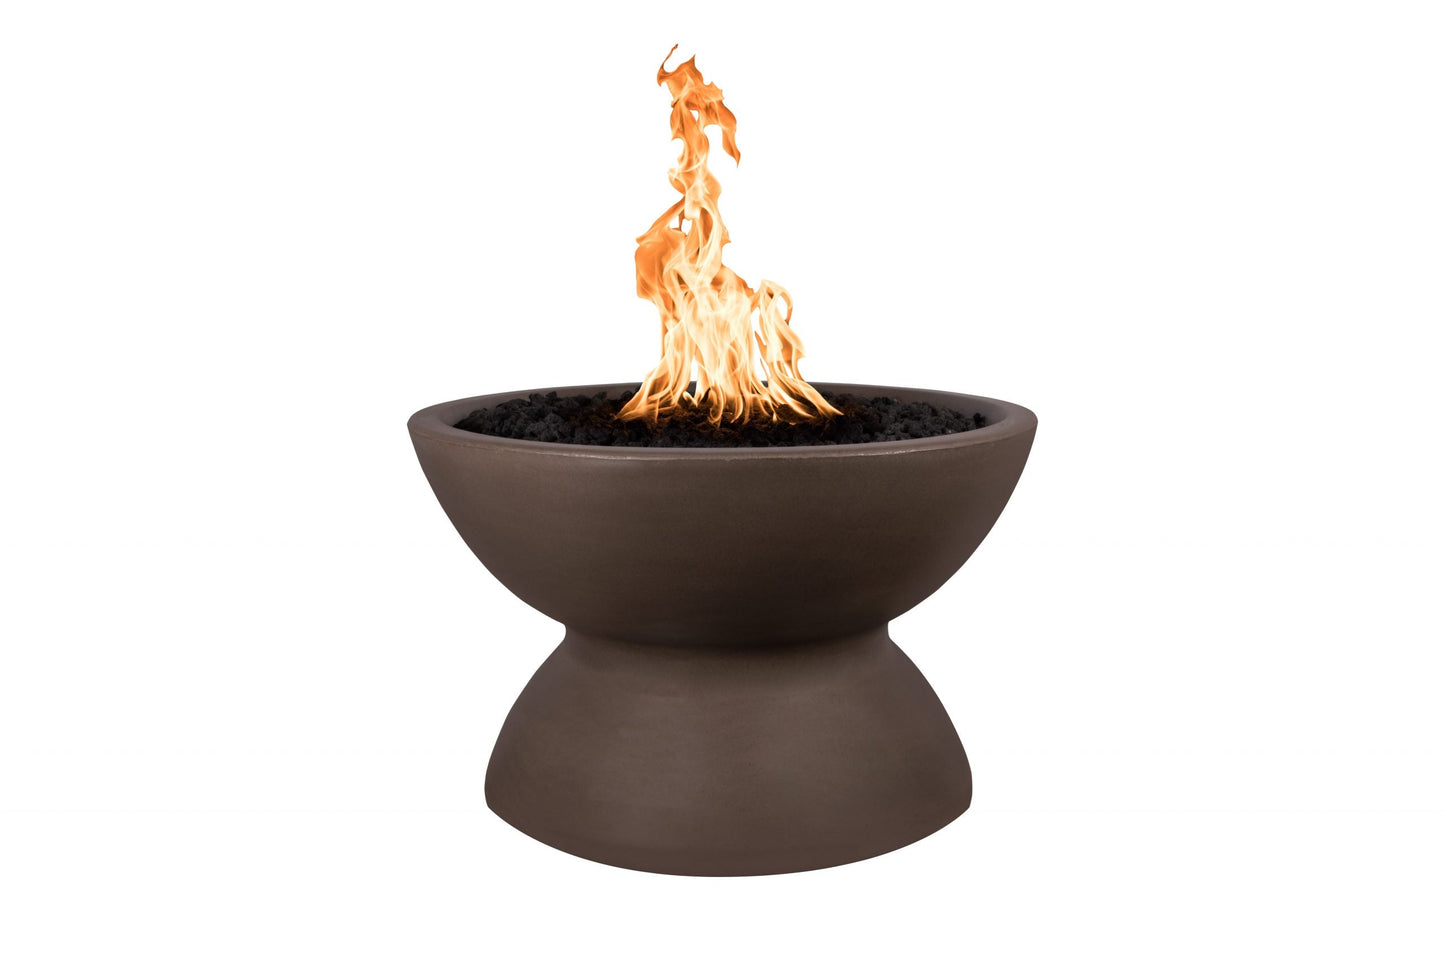 The Outdoor Plus Round Copa 33" Natural Gray GFRC Concrete Liquid Propane Fire Pit with 12V Electronic Ignition